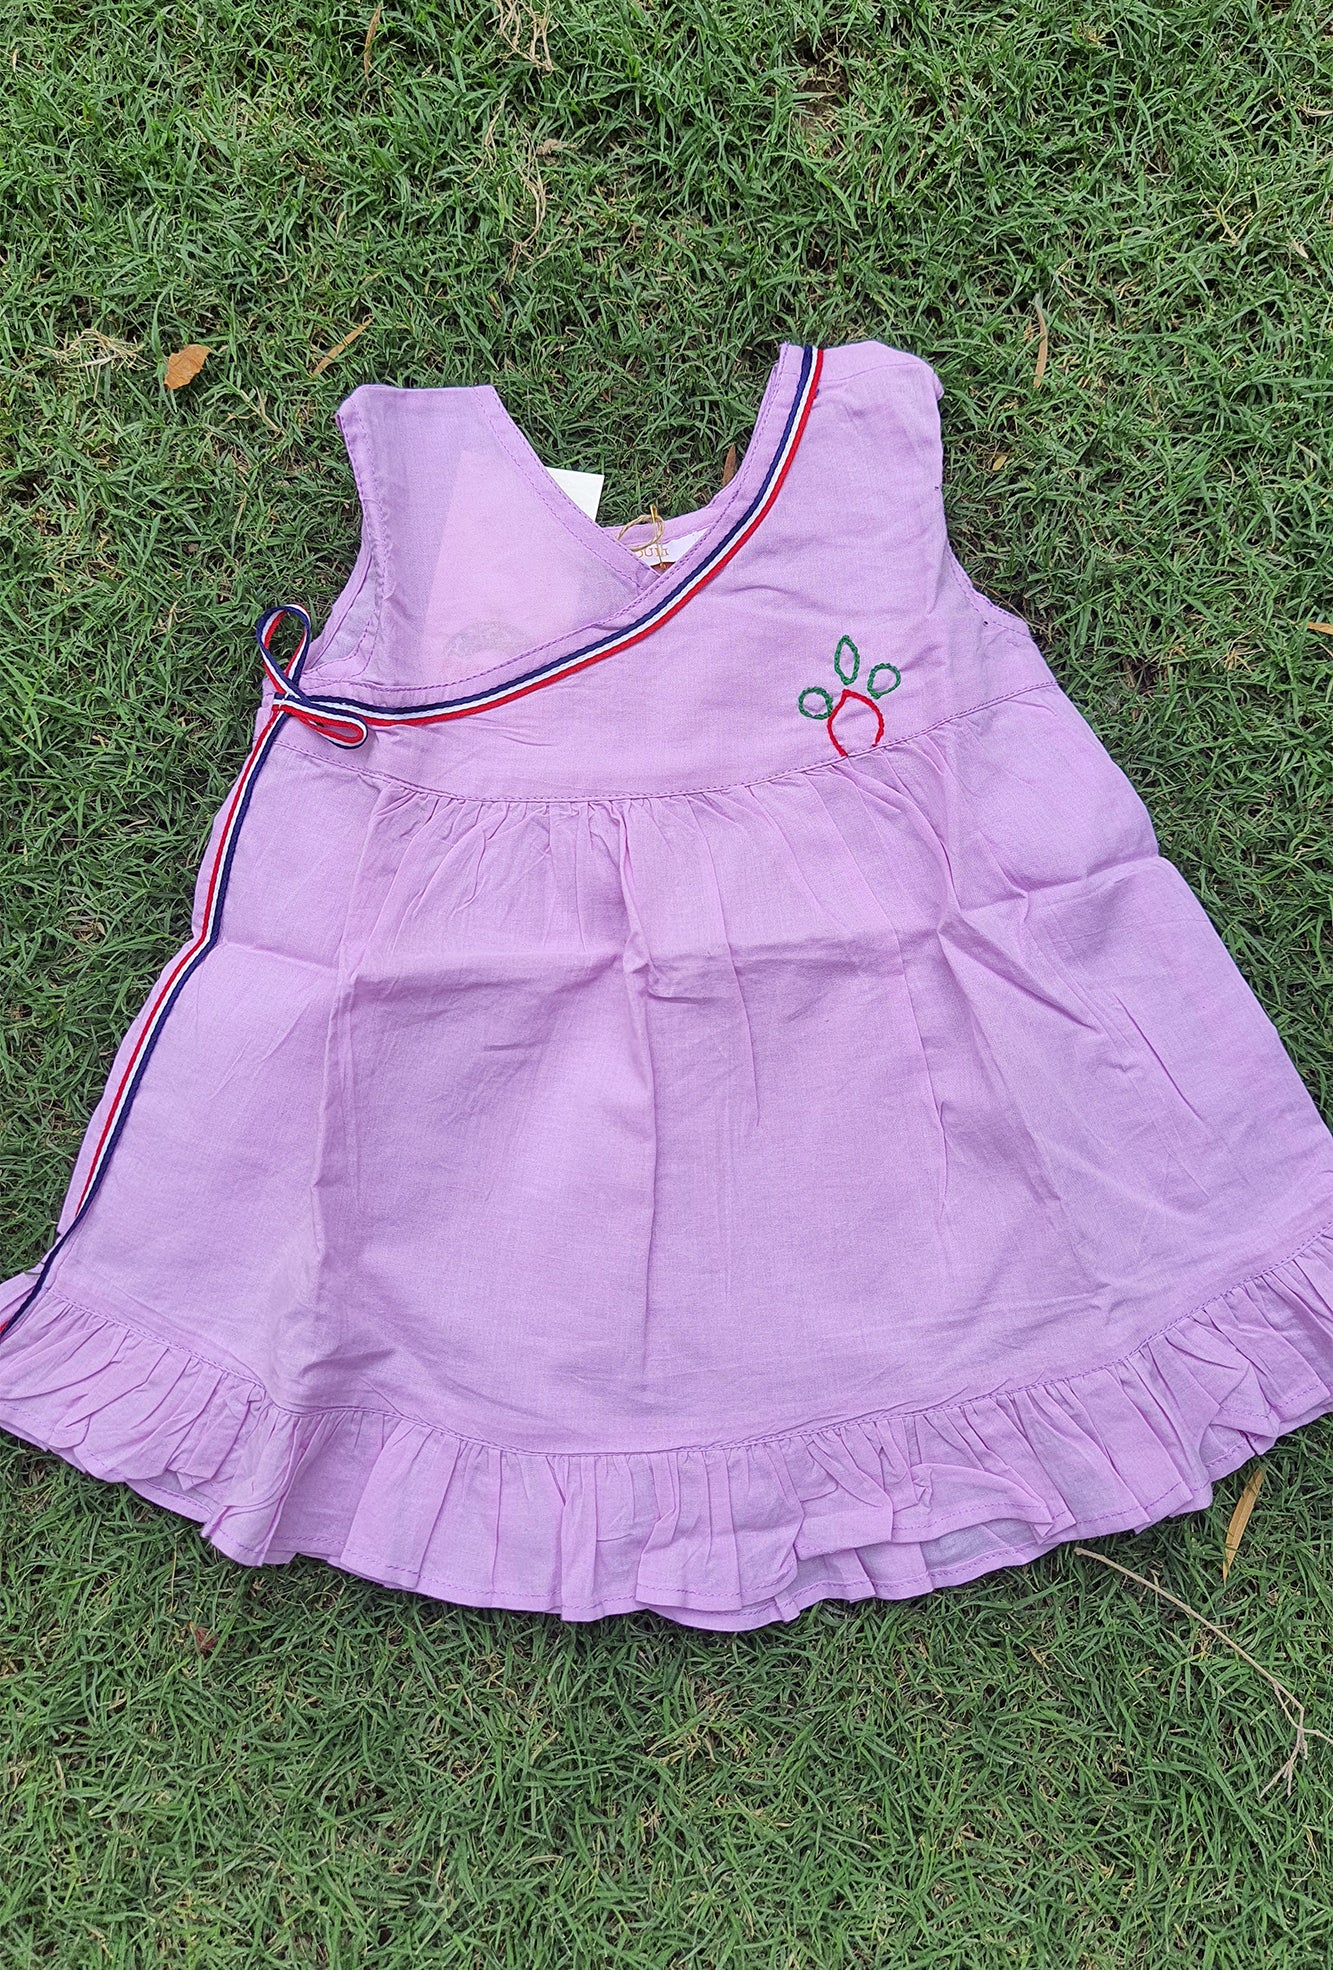 Infant Girl Frock Embroidered Purple